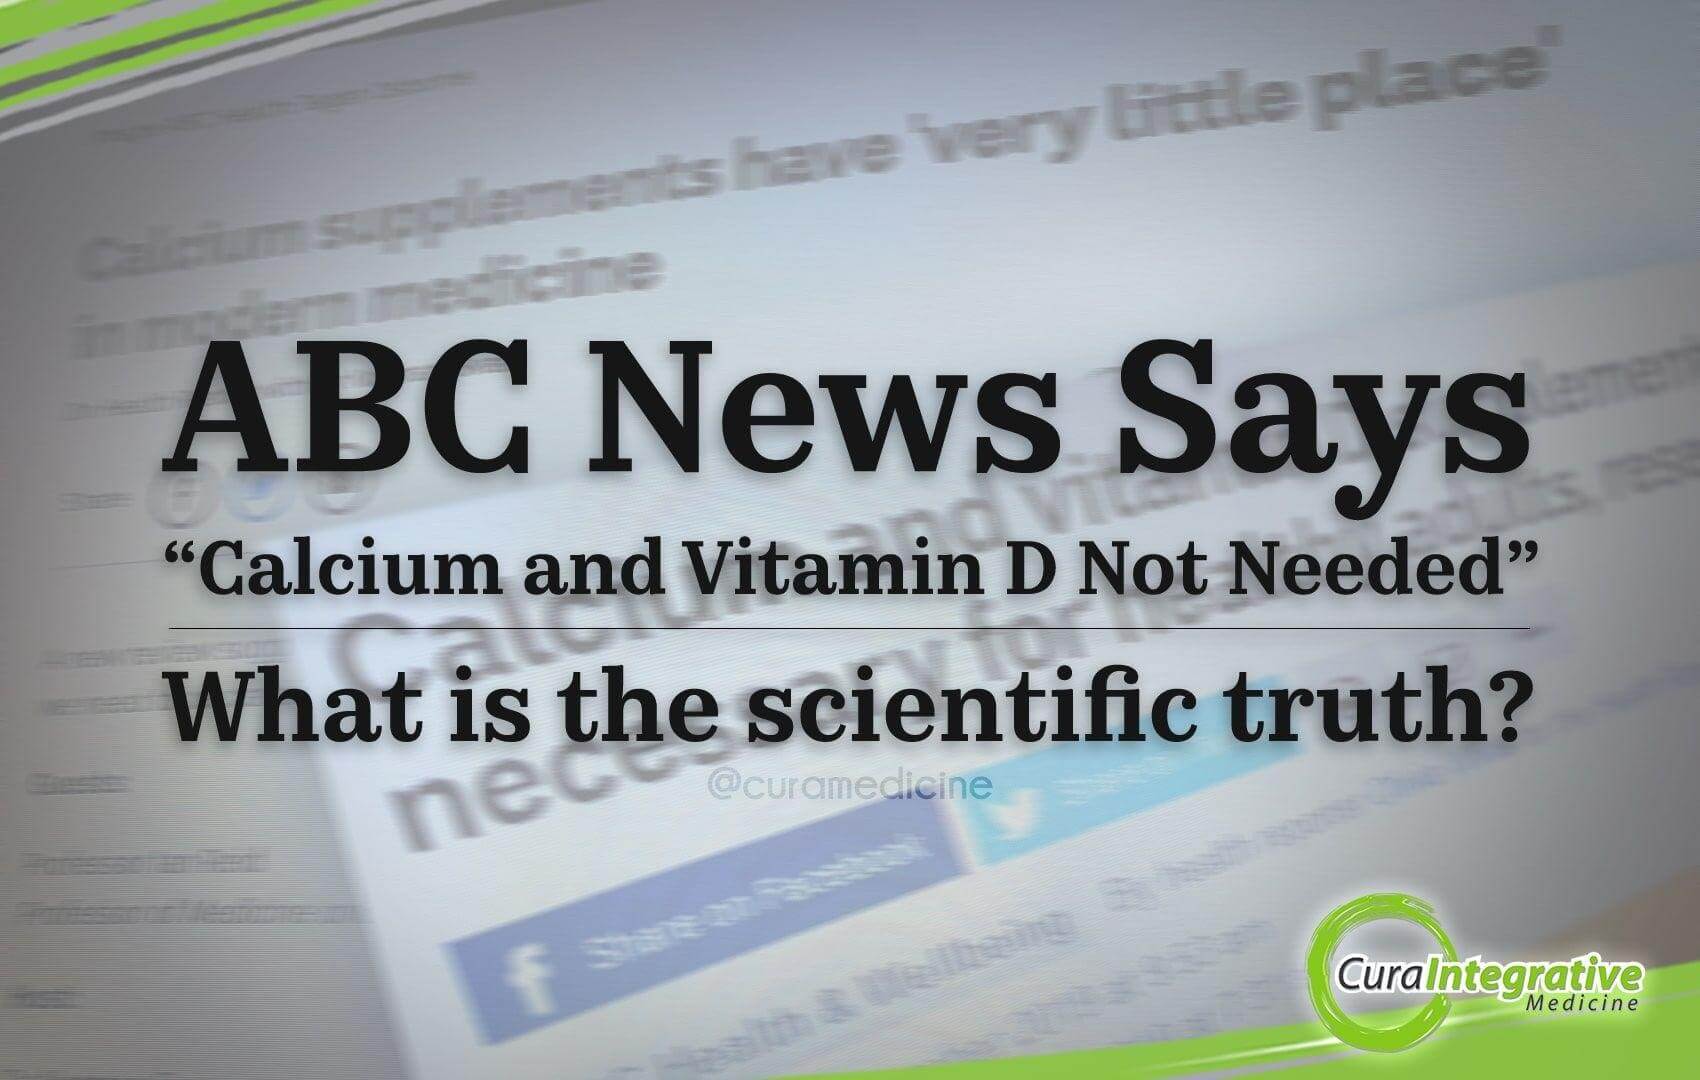 ABC News Says “Calcium and Vitamin D Not Needed” – What is the scientific truth?